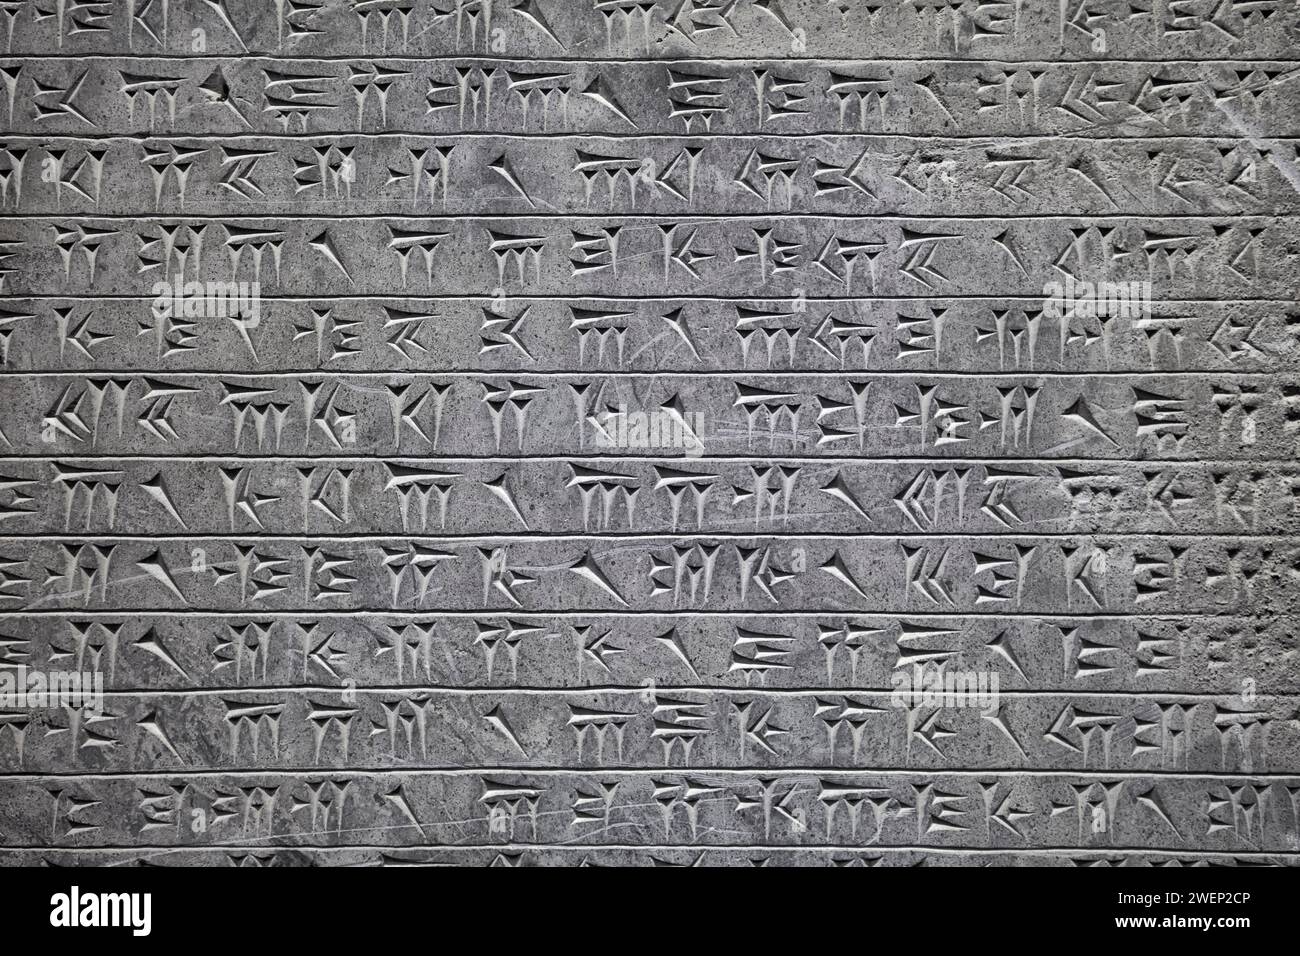 Cuneiform inscriptions on a stone displayed in Persepolis Museum, Iran. Stock Photo